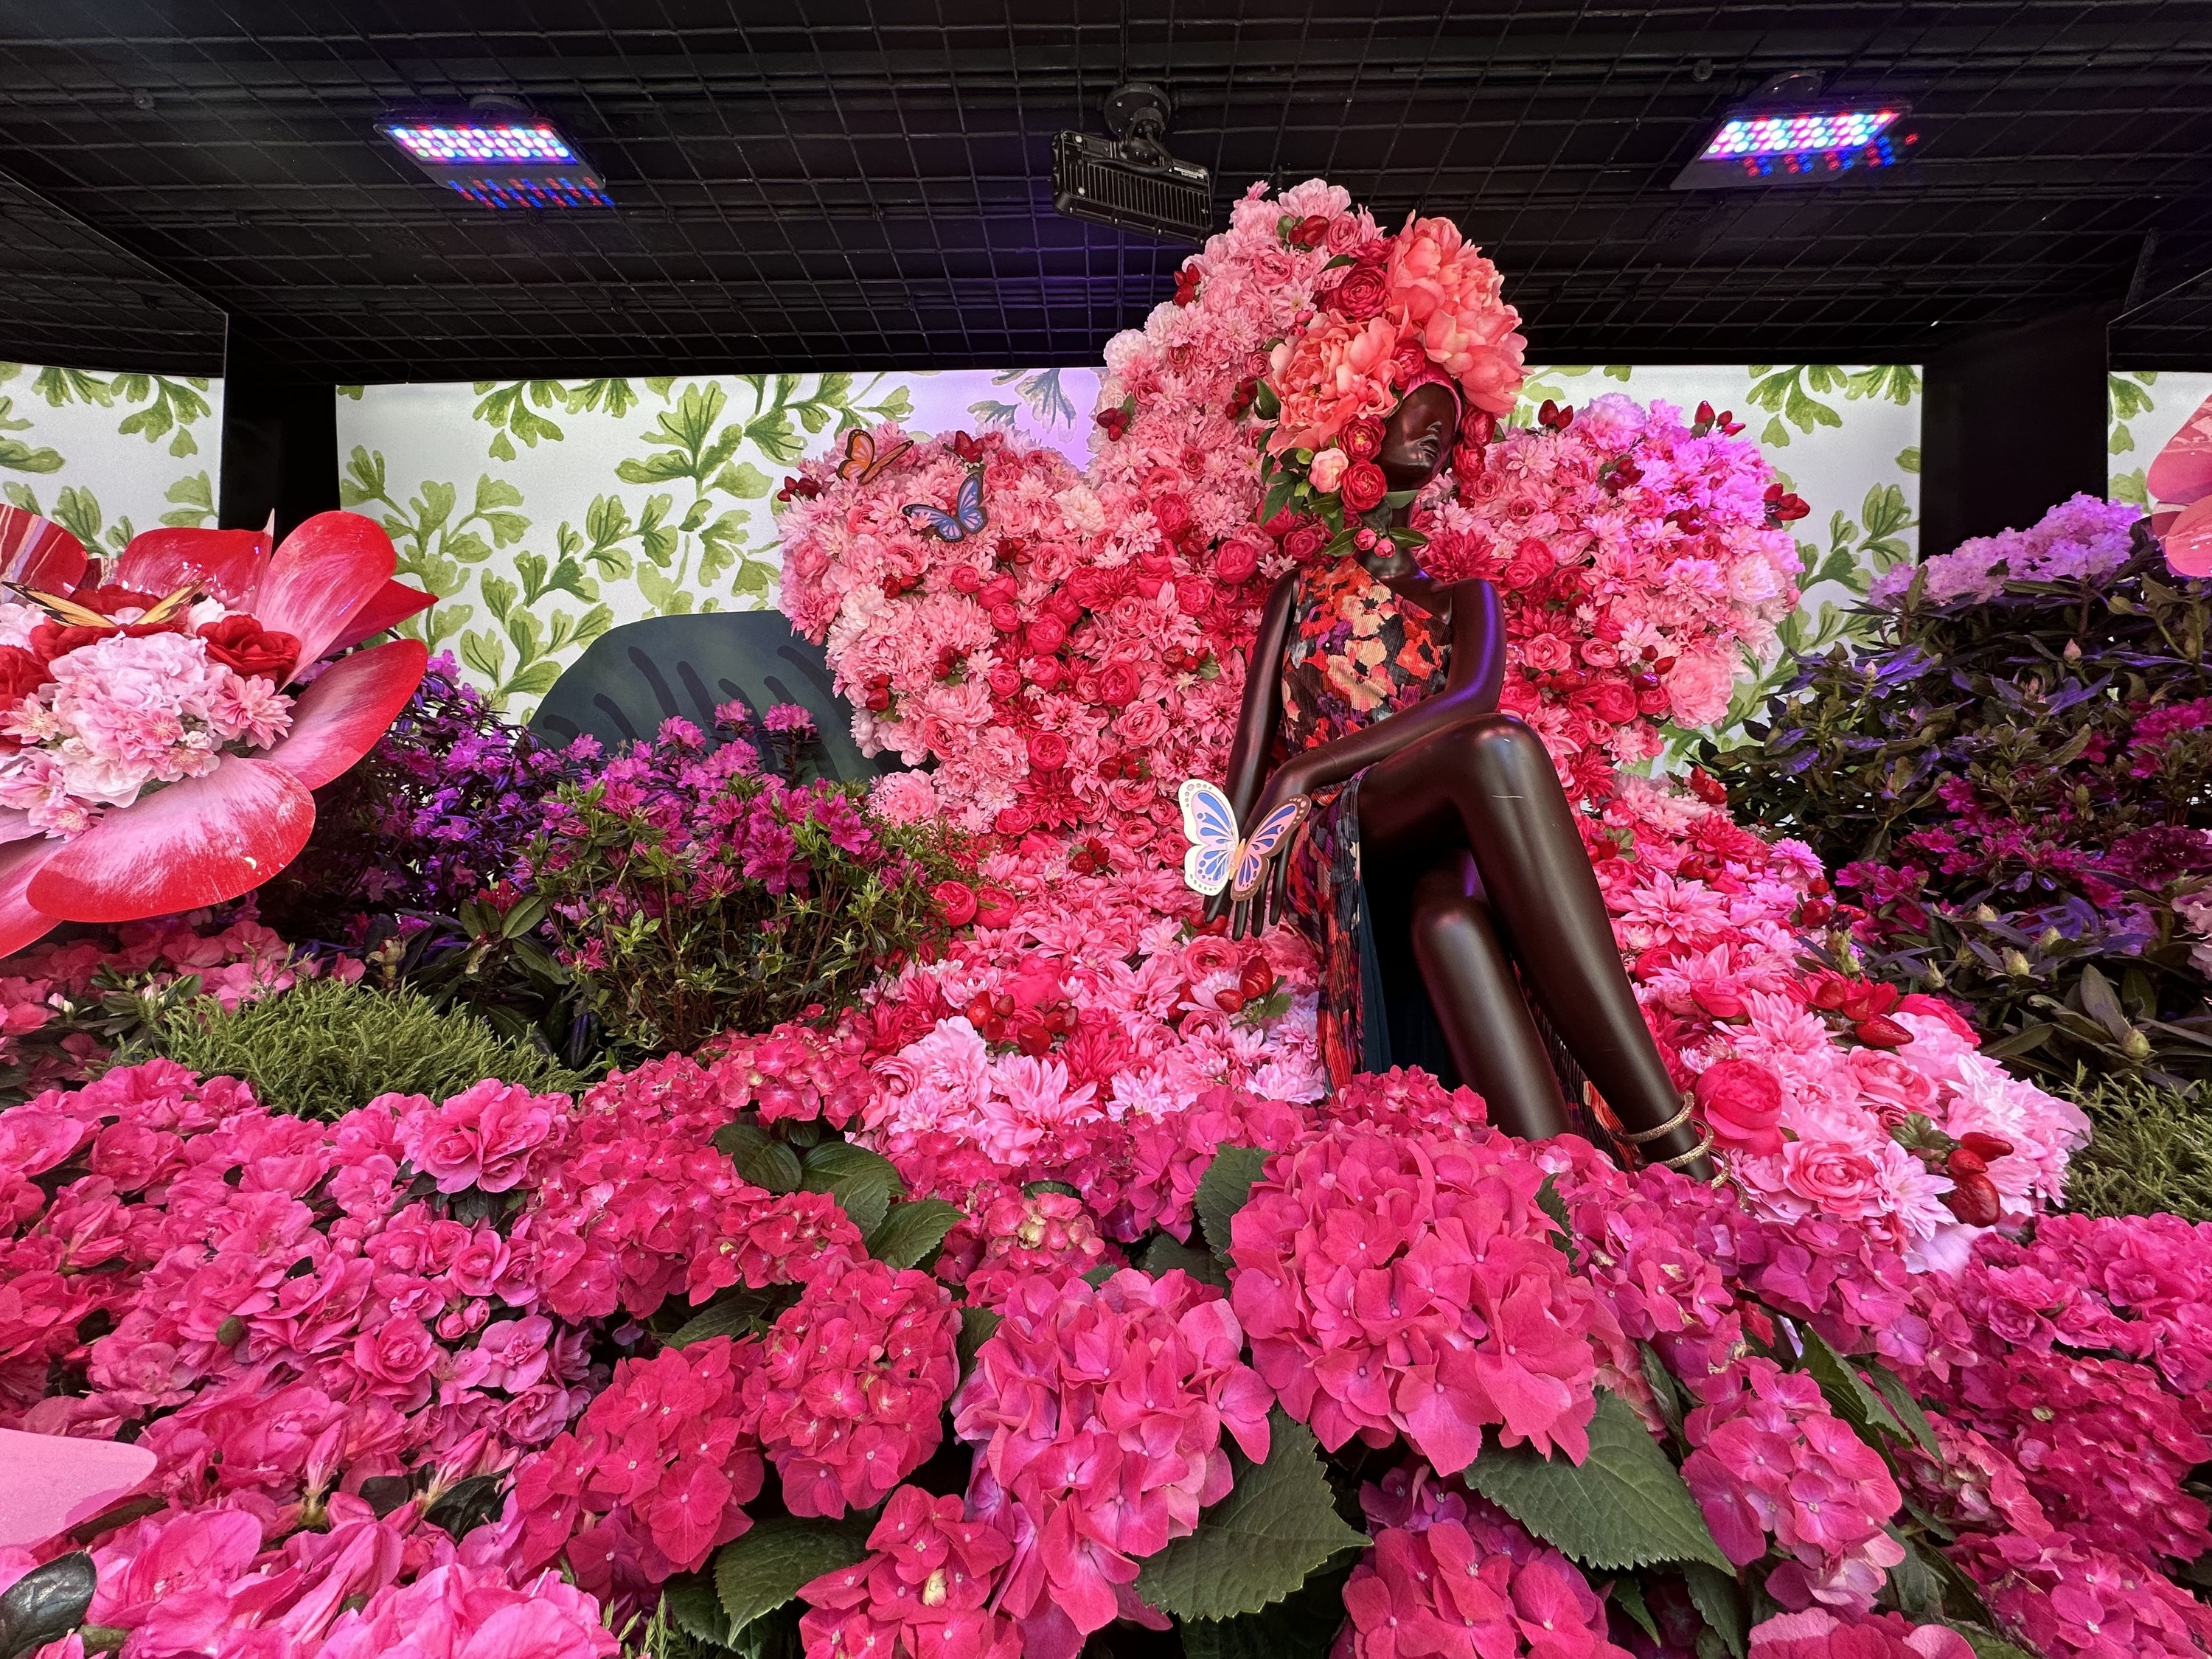 All the fantastic spring flower shows to go see in NYC right now